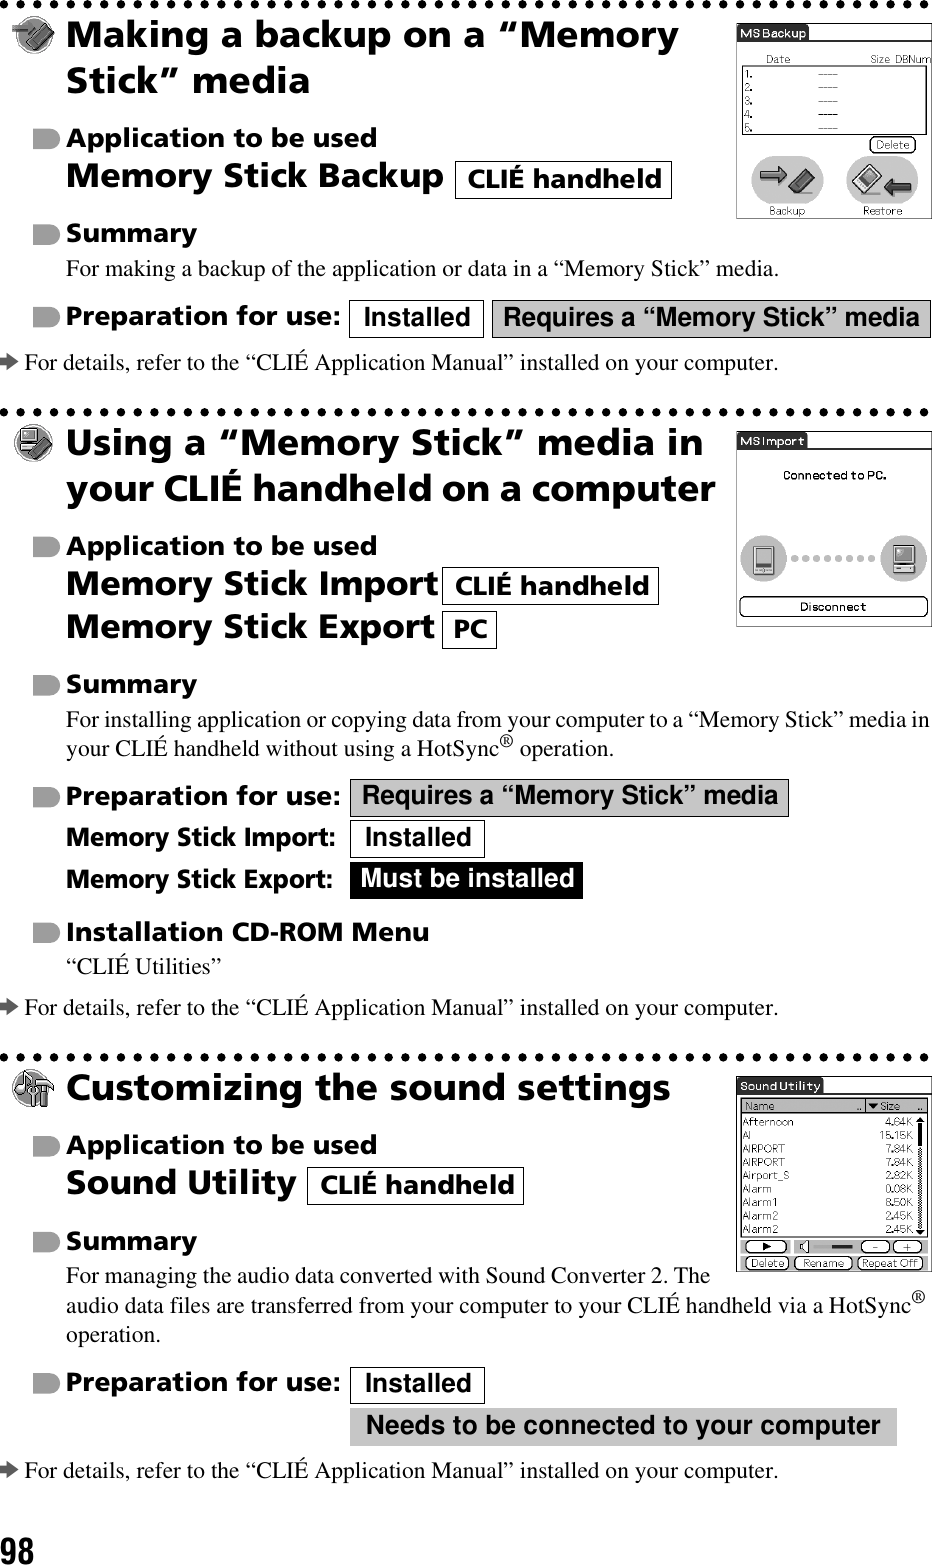 98Making a backup on a “Memory Stick” mediaApplication to be usedMemory Stick Backup SummaryFor making a backup of the application or data in a “Memory Stick” media.Preparation for use:   bFor details, refer to the “CLIÉ Application Manual” installed on your computer.Using a “Memory Stick” media in your CLIÉ handheld on a computerApplication to be usedMemory Stick ImportMemory Stick ExportSummaryFor installing application or copying data from your computer to a “Memory Stick” media in your CLIÉ handheld without using a HotSync® operation.Preparation for use:Memory Stick Import:Memory Stick Export:Installation CD-ROM Menu“CLIÉ Utilities”bFor details, refer to the “CLIÉ Application Manual” installed on your computer.Customizing the sound settingsApplication to be usedSound Utility SummaryFor managing the audio data converted with Sound Converter 2. The audio data files are transferred from your computer to your CLIÉ handheld via a HotSync® operation.Preparation for use:  bFor details, refer to the “CLIÉ Application Manual” installed on your computer.CLIÉ handheldInstalled Requires a “Memory Stick” mediaCLIÉ handheldPCRequires a “Memory Stick” mediaInstalledMust be installedCLIÉ handheldInstalledNeeds to be connected to your computer